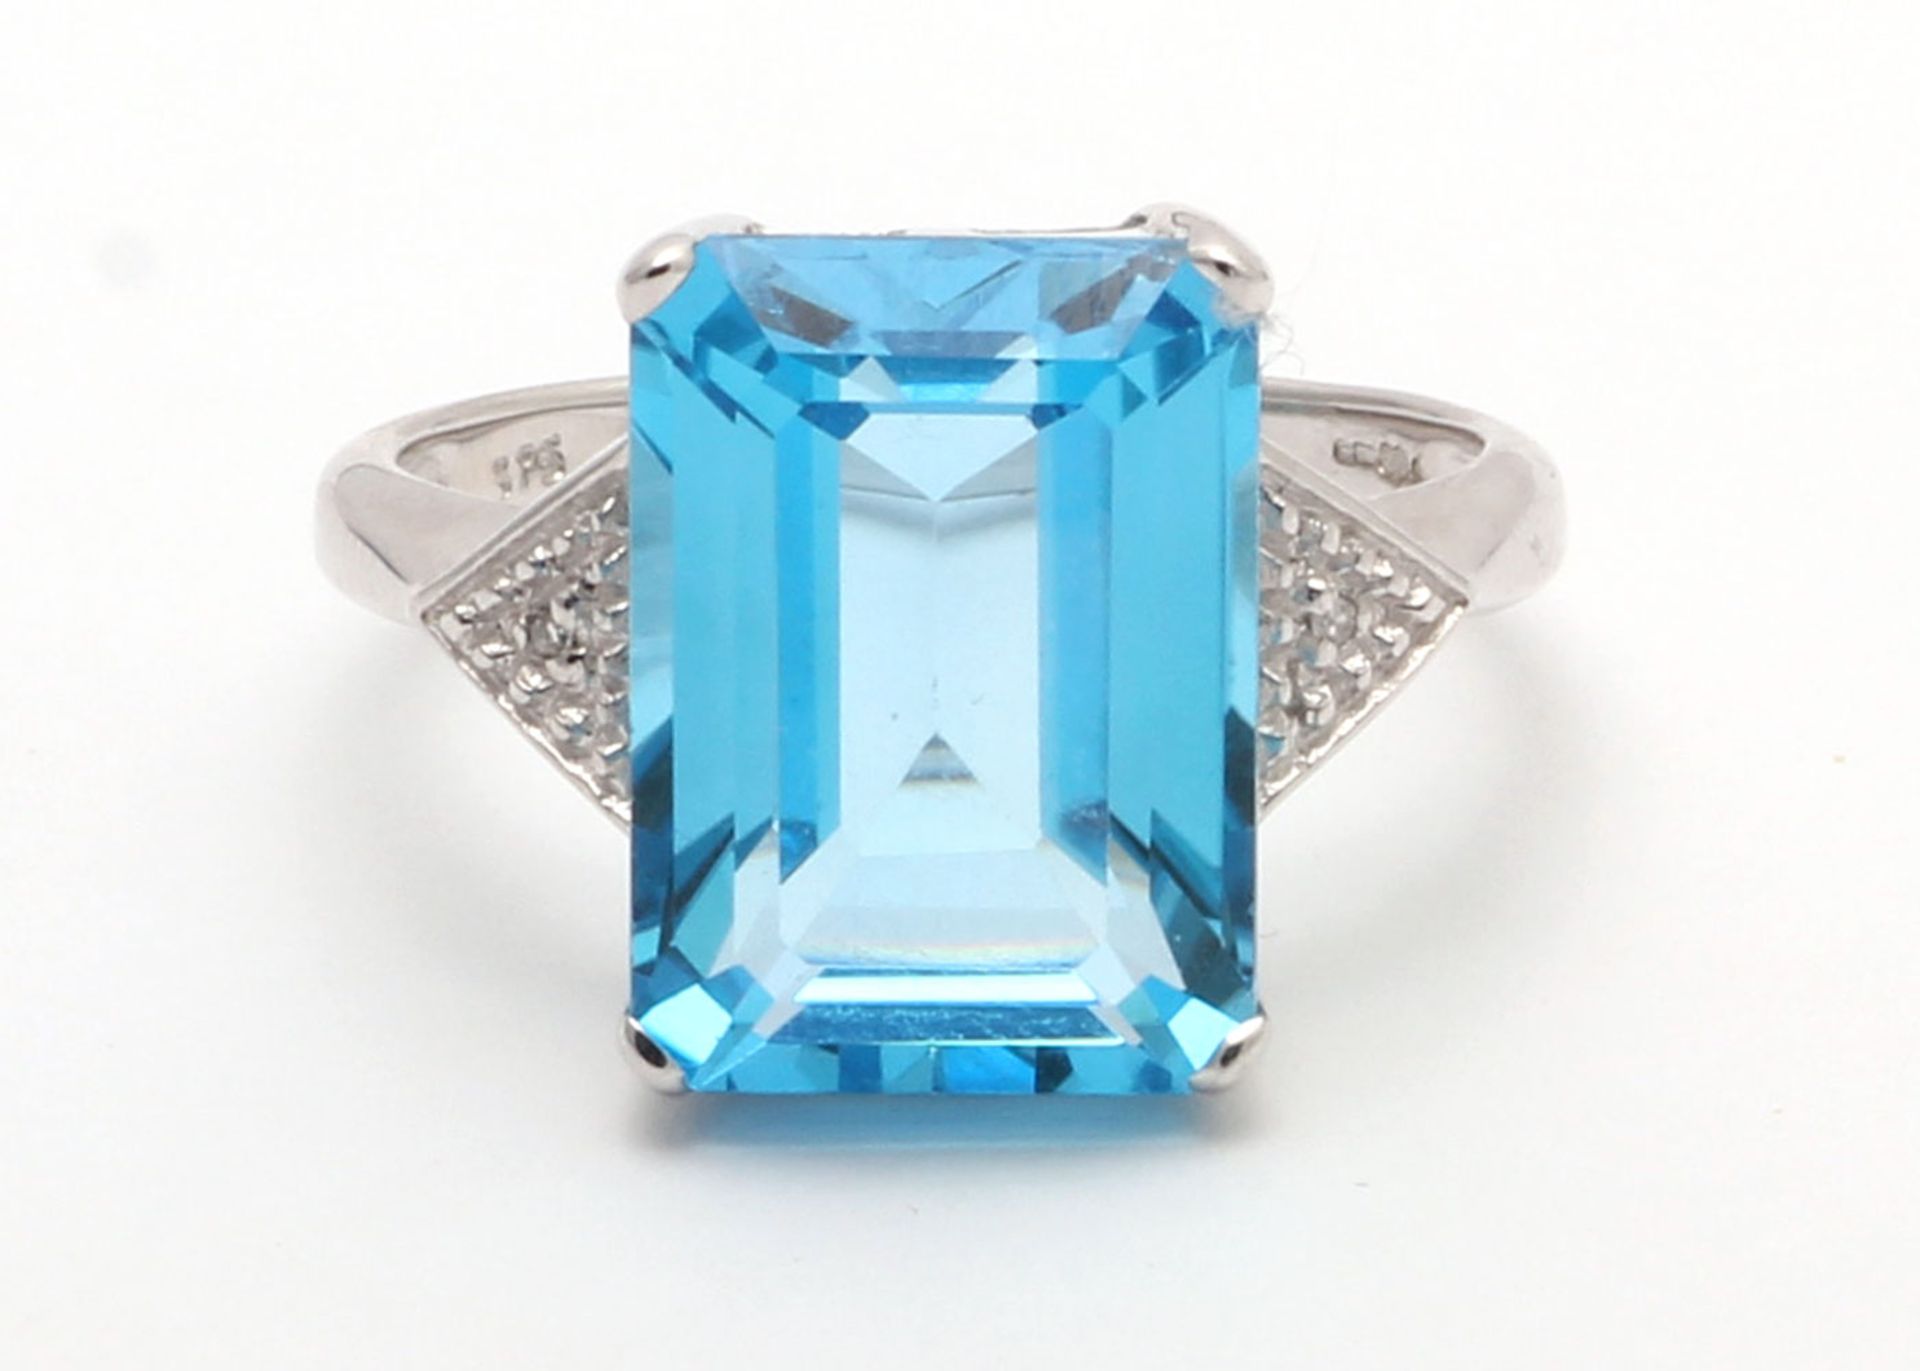 9ct White Gold Diamond And Blue Topaz Ring 0.01 Carats - Valued by GIE £1,620.00 - This stunning - Image 5 of 7